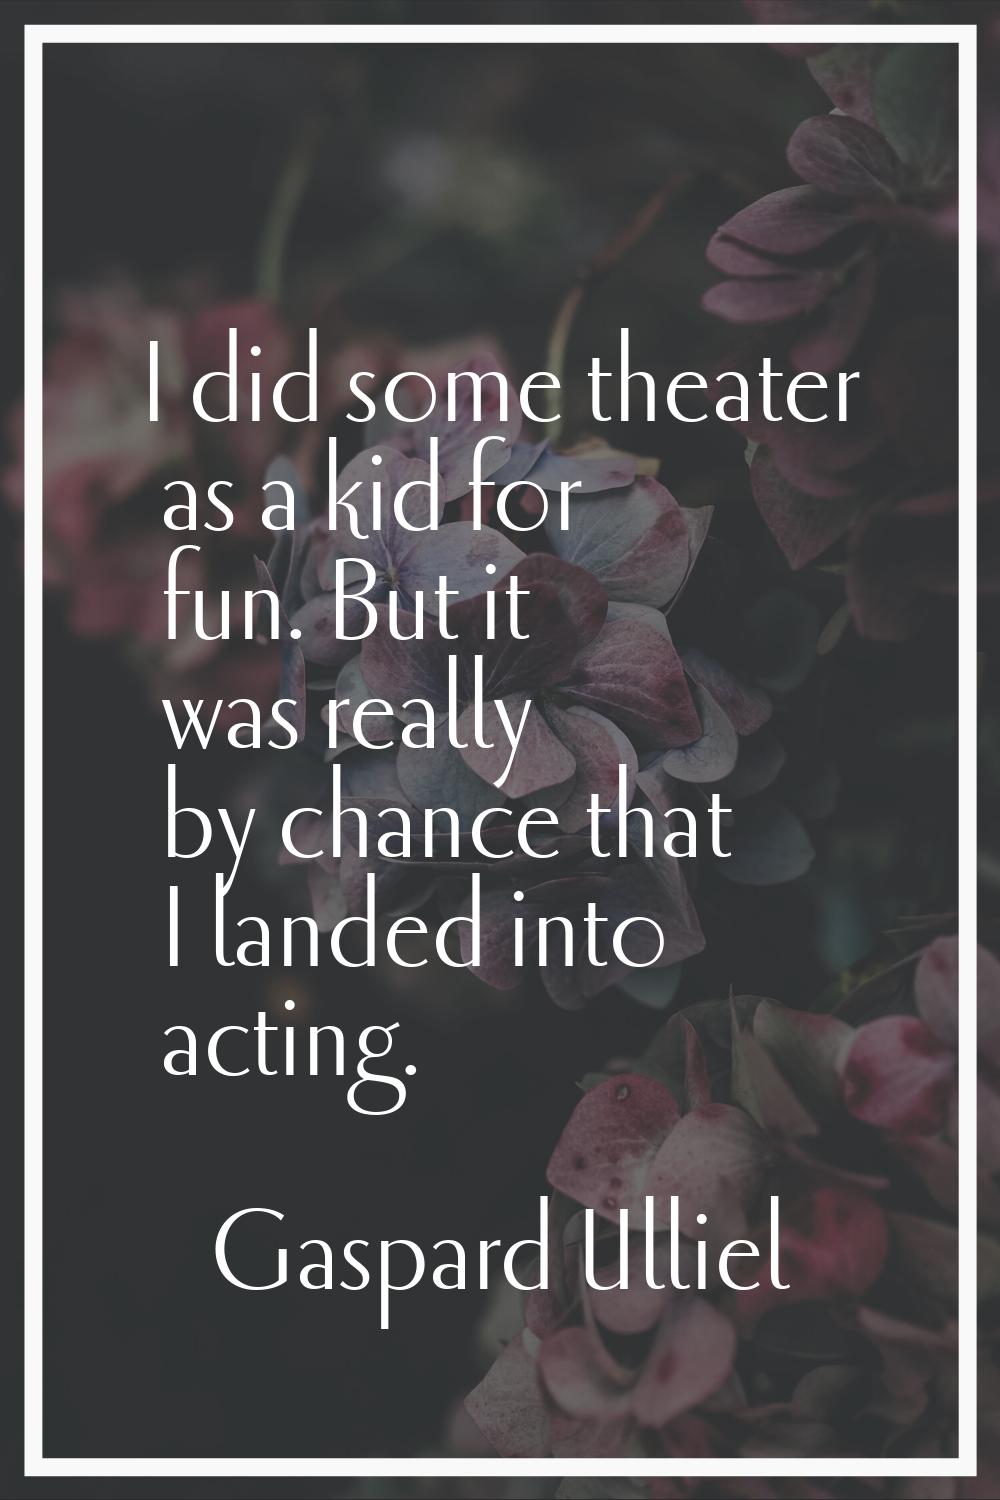 I did some theater as a kid for fun. But it was really by chance that I landed into acting.